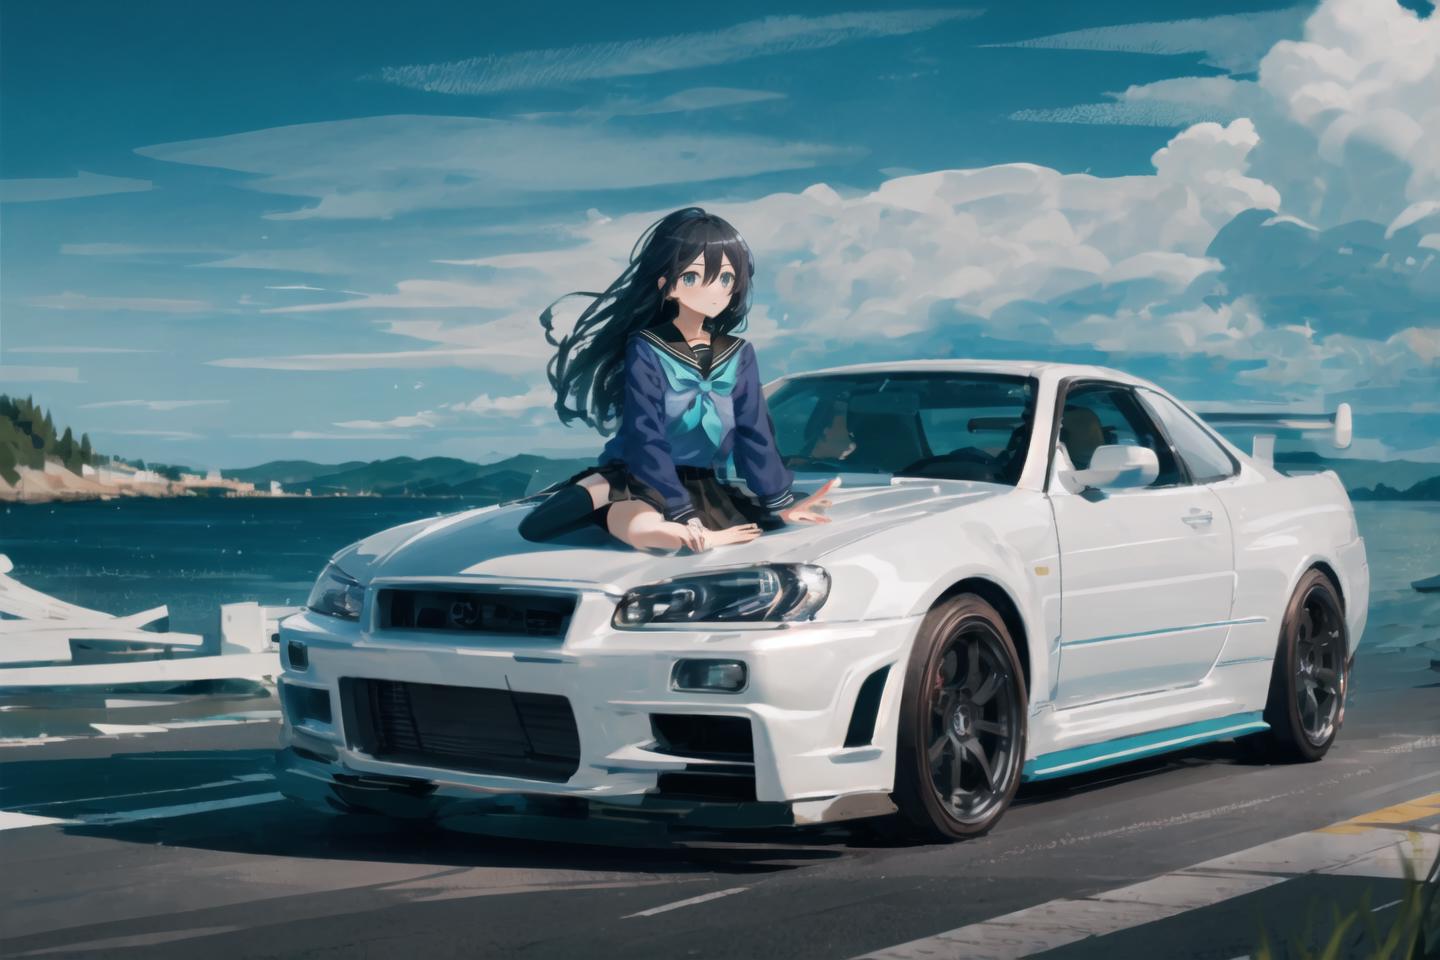 NISSAN Skyline GT-R R34 car LORA image by Mikoeiaow